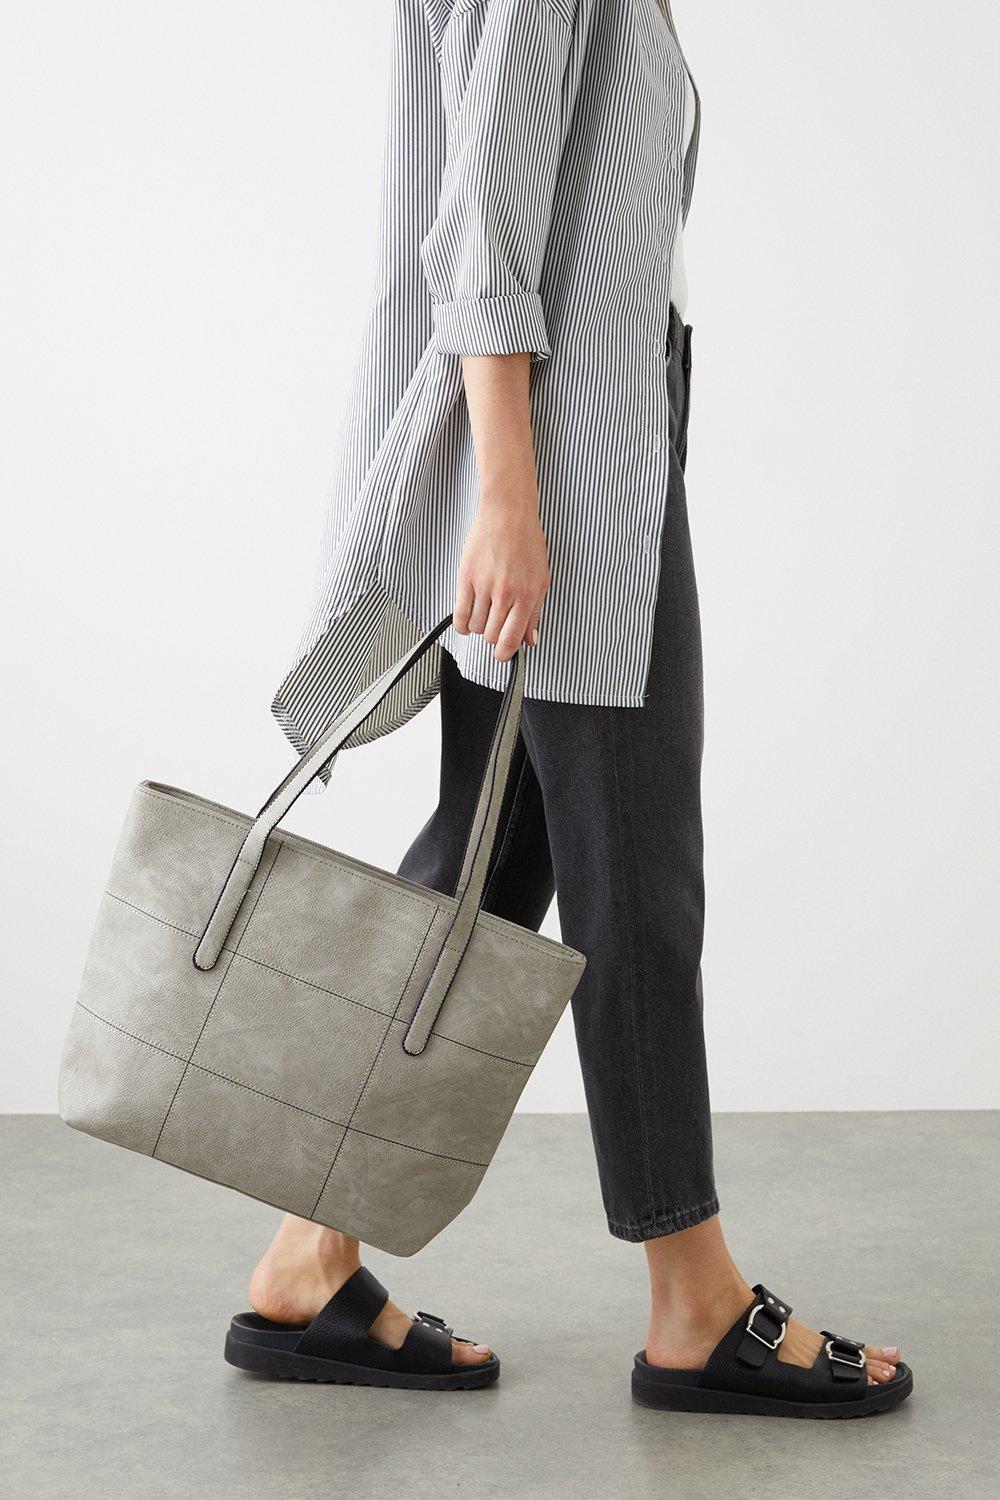 Women's Trish Stitched Tote Bag - grey - ONE SIZE